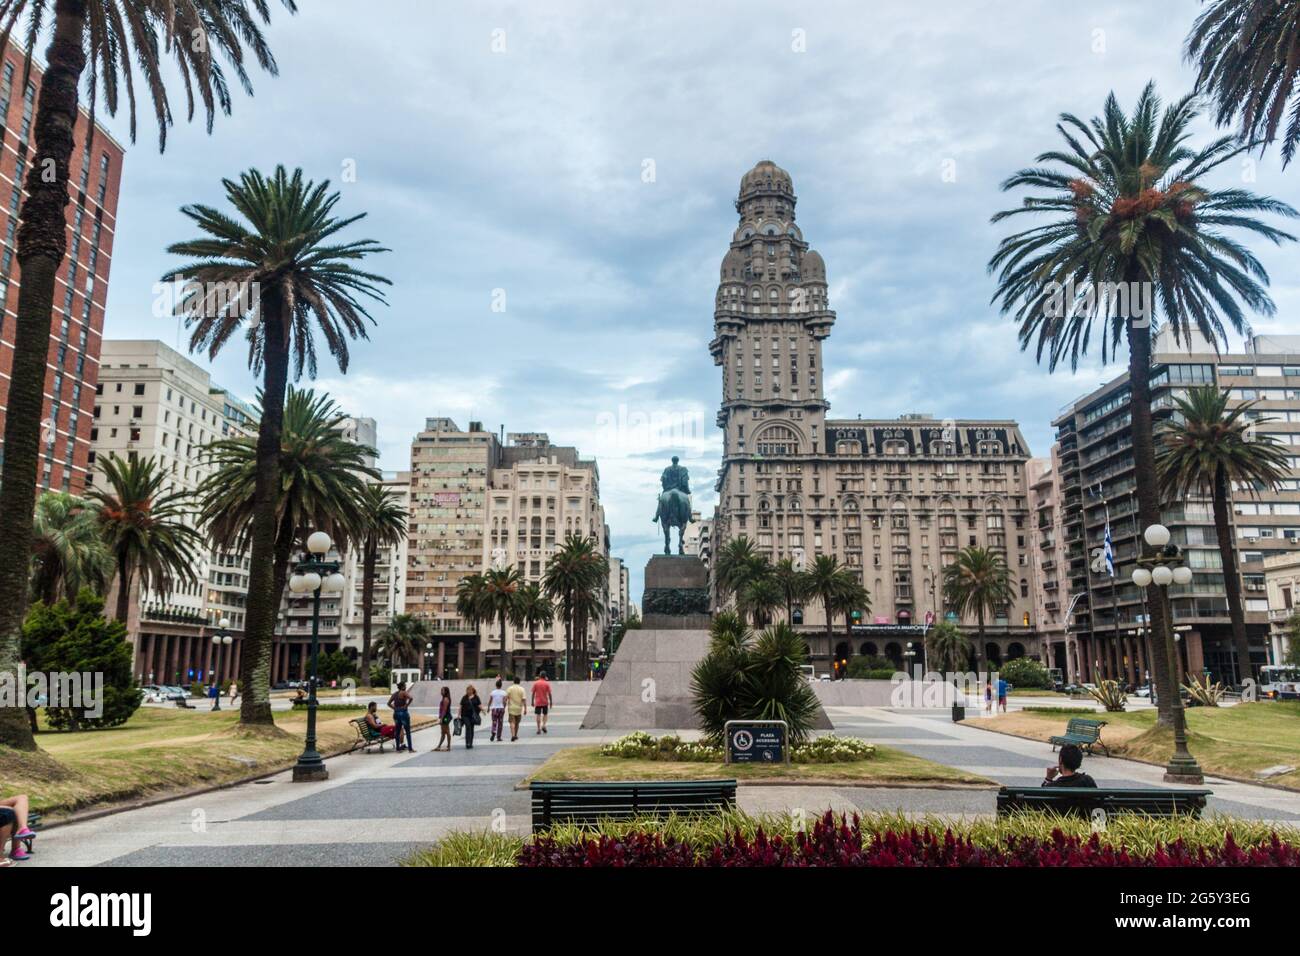 MONTEVIDEO, URUGUAY - FEB 18, 2015: View of Plaza Independecia square in the center of Montevideo. Stock Photo